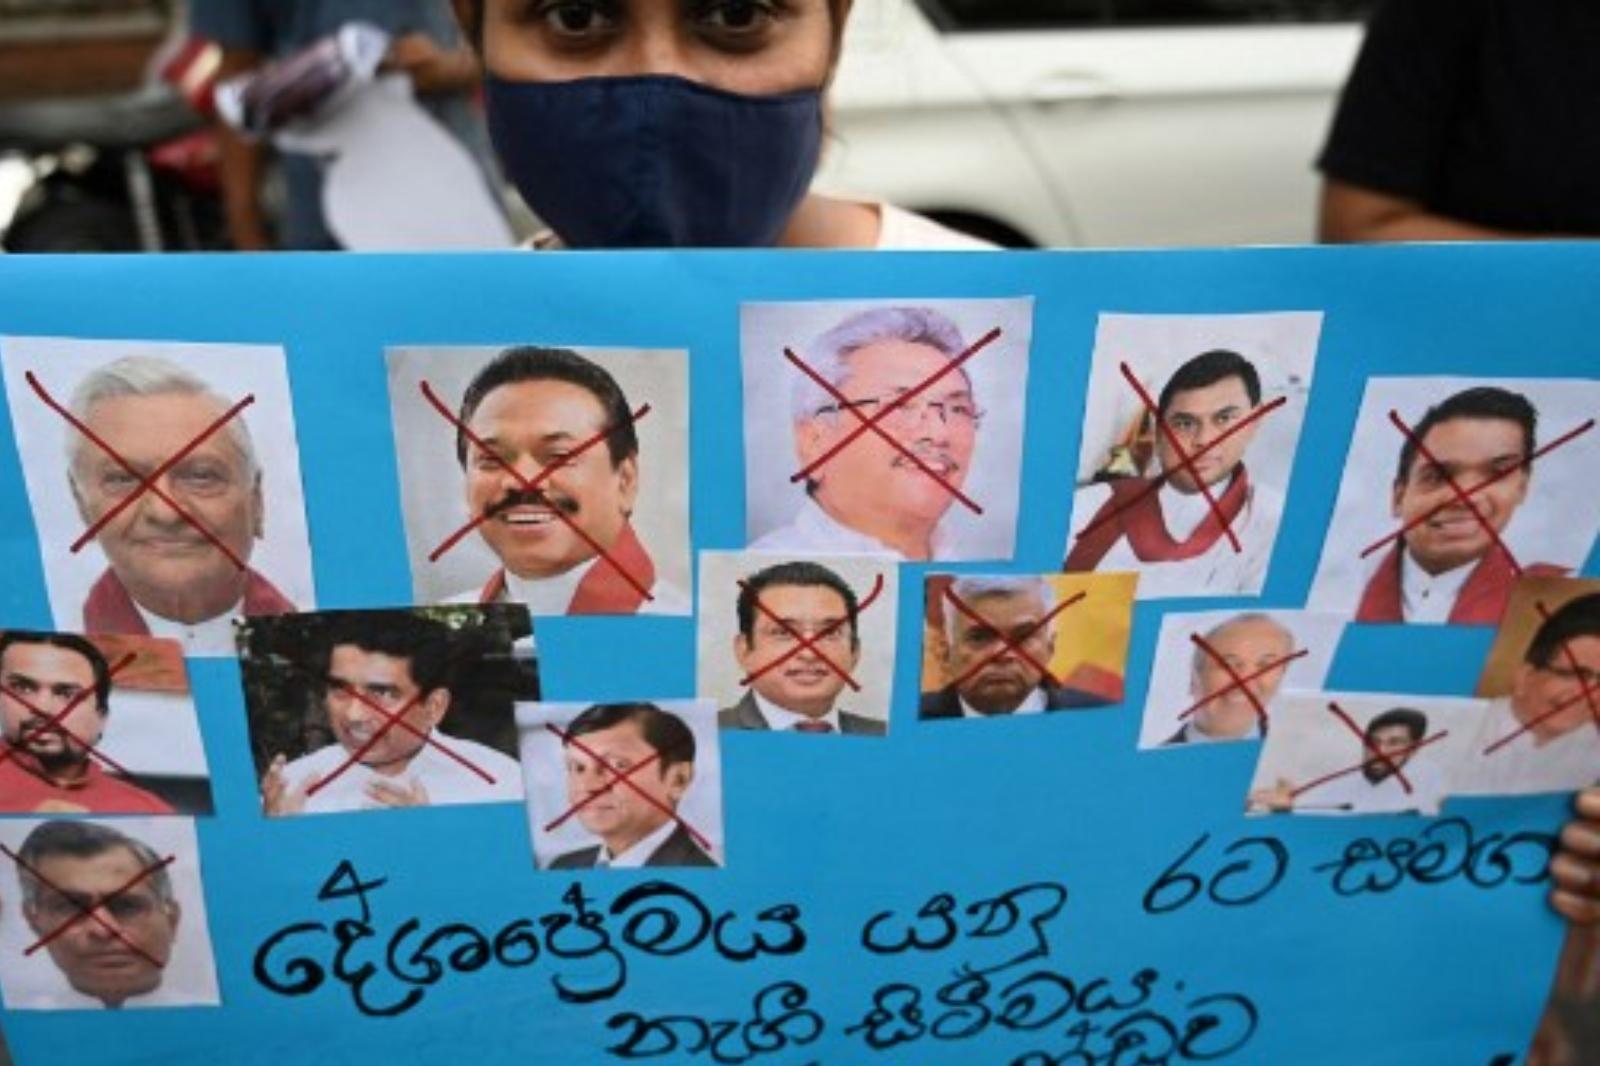 Following anti-government protests against the ongoing economic crisis, the Sri Lankan Cabinet resigned en masse on Sunday night, except Prime Minister Mahinda Rajapaksa.